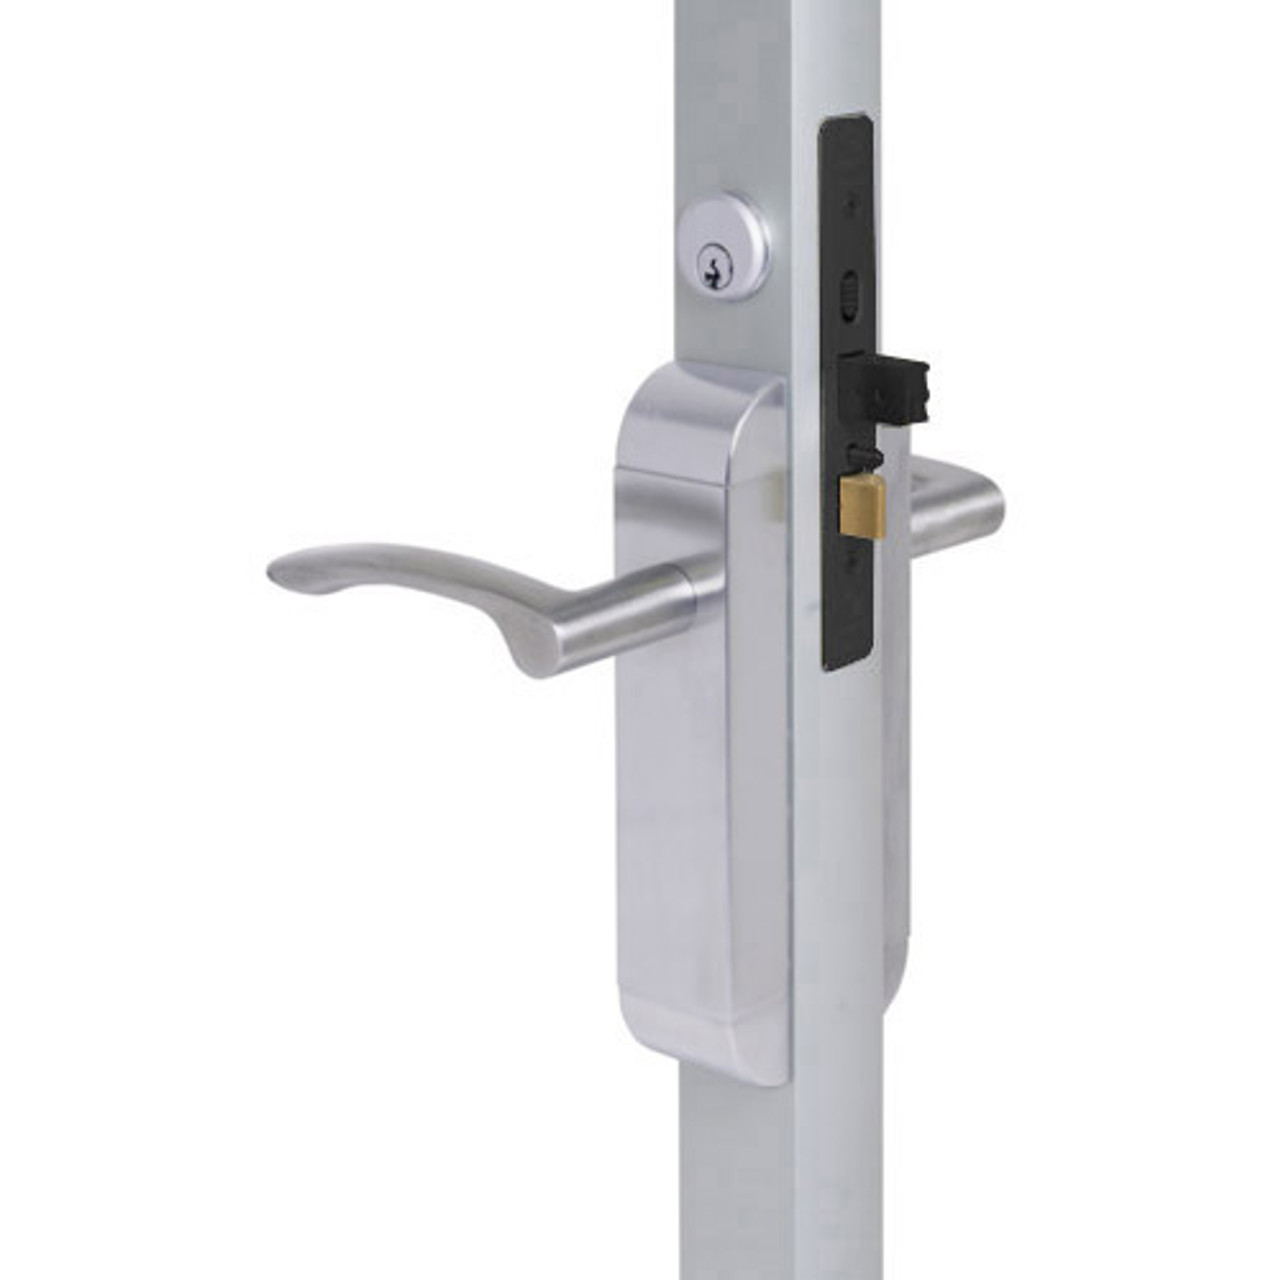 2190-423-202-32 Adams Rite Dual Force Interconnected 2190 series Deadlock/Deadlatch in Bright Stainless